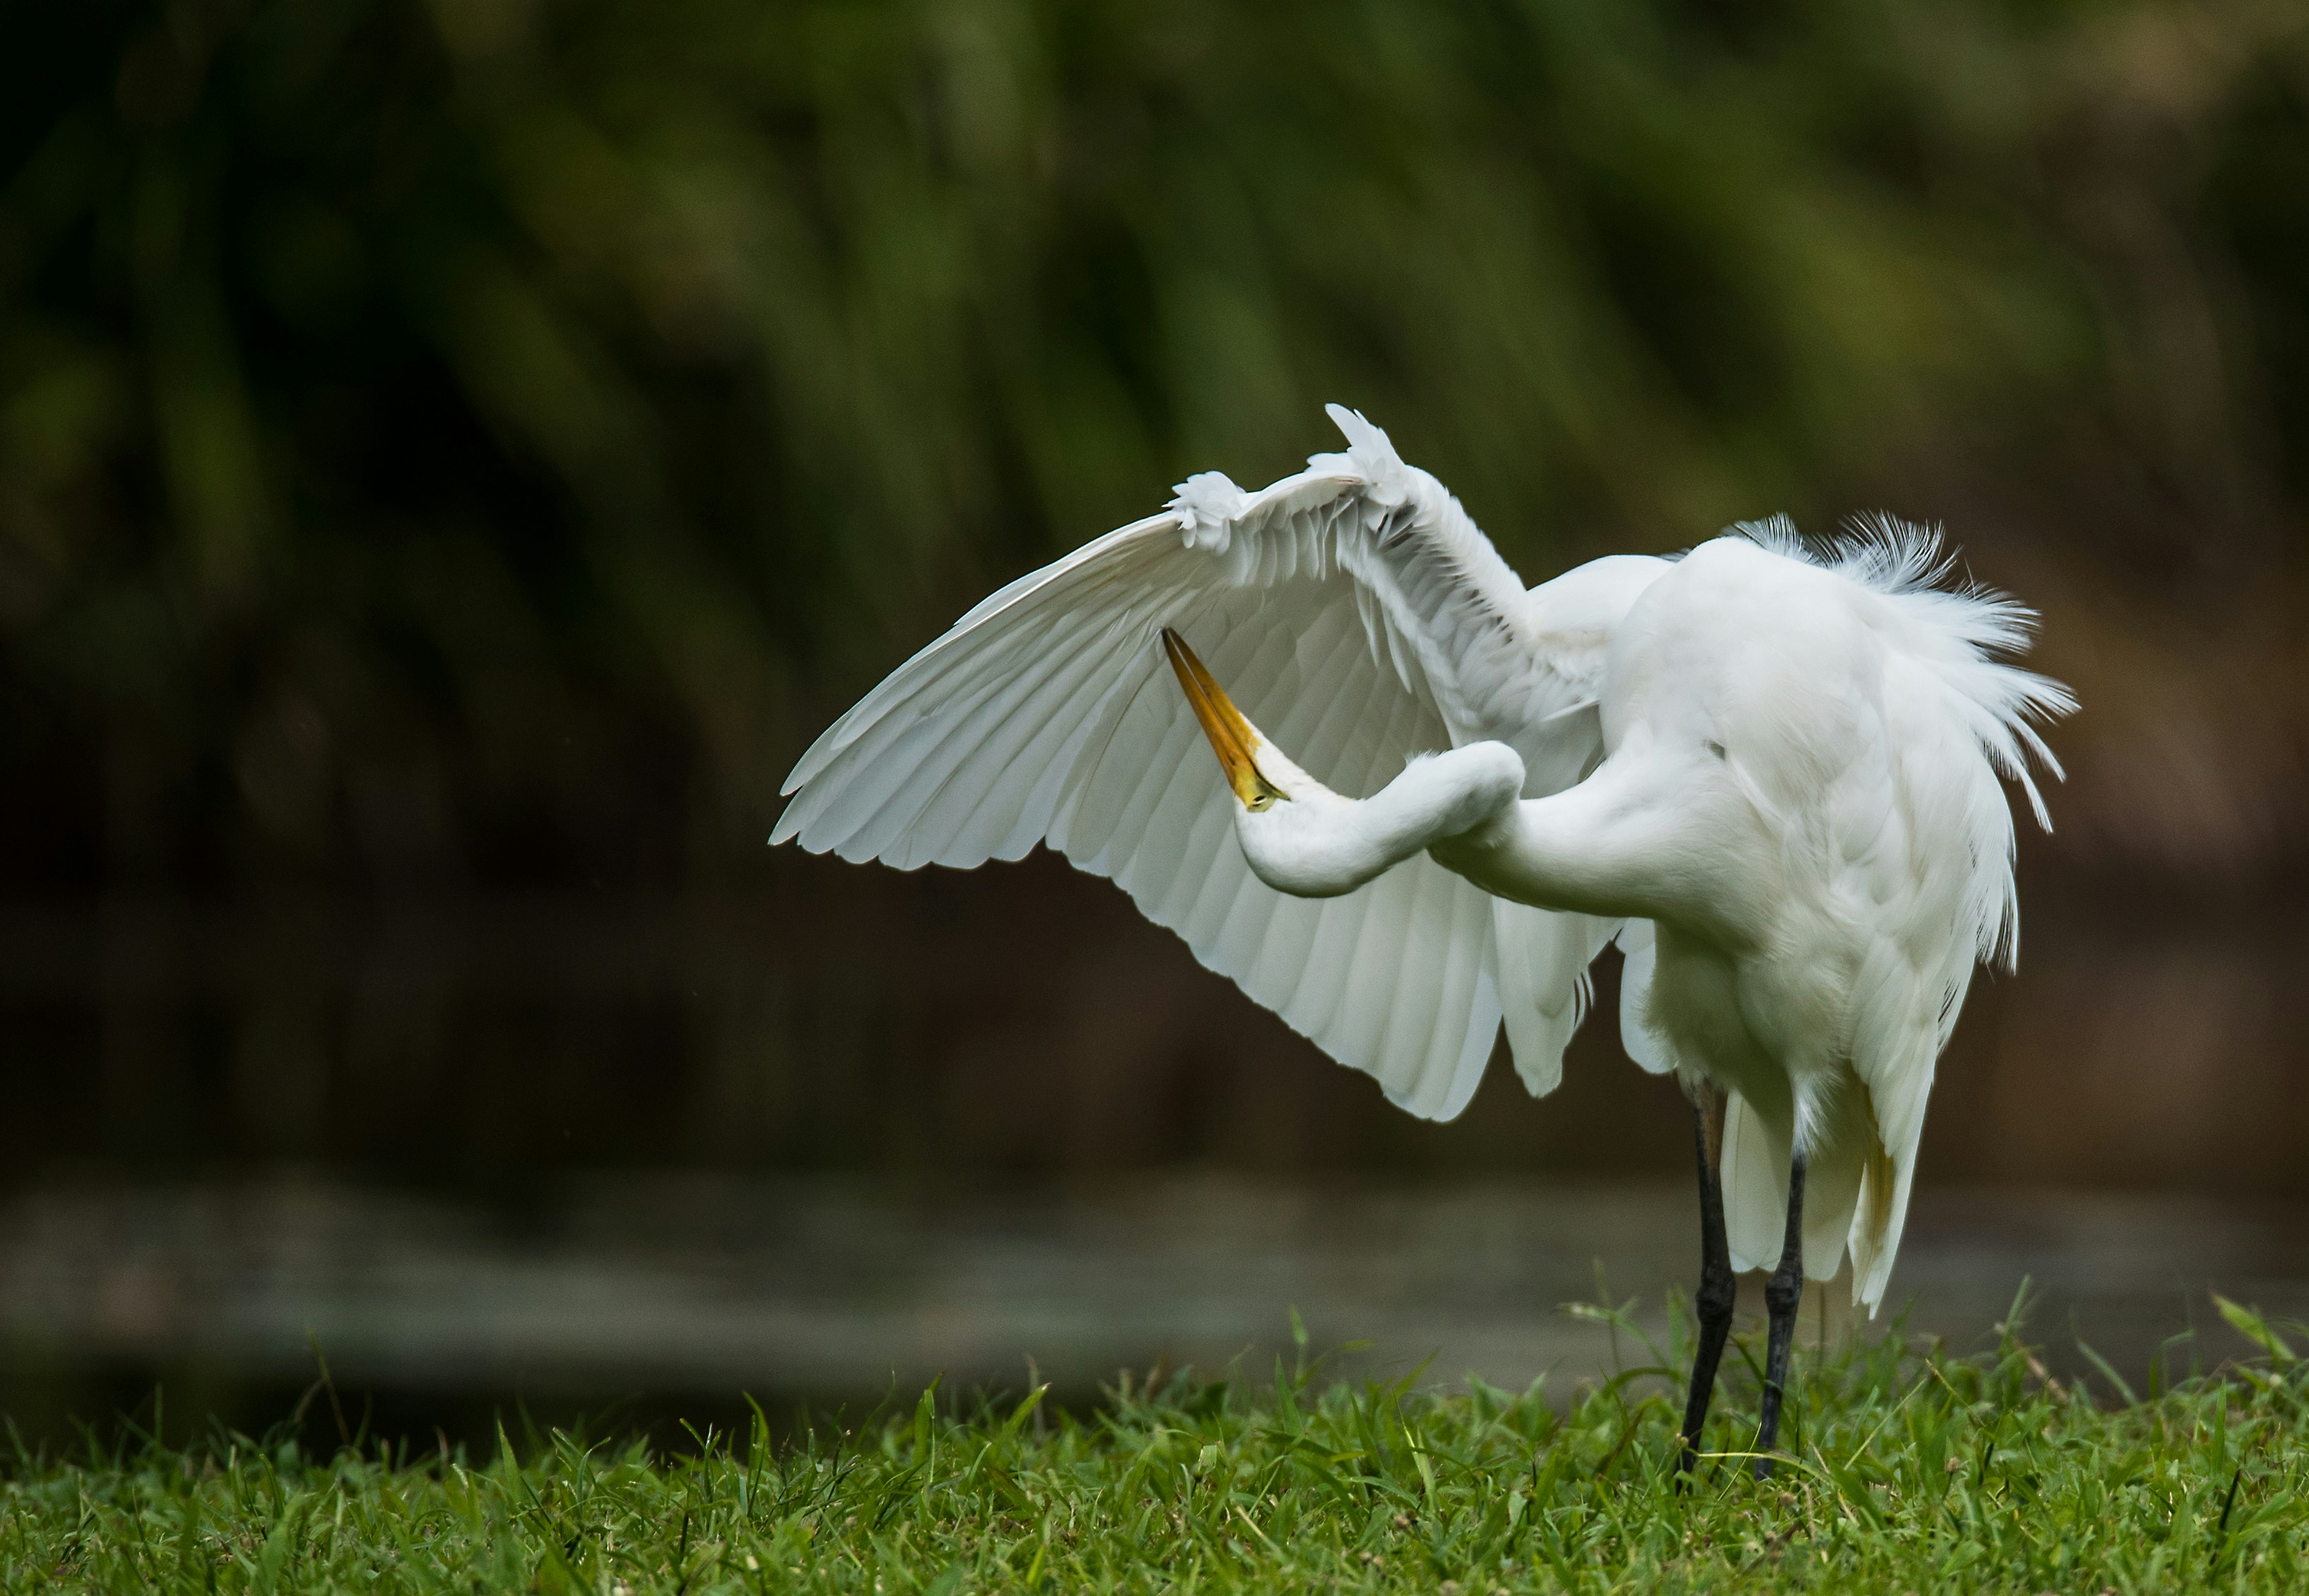 A Great Egret preens its feathers at Freshwater Lake in Cairns Australia.